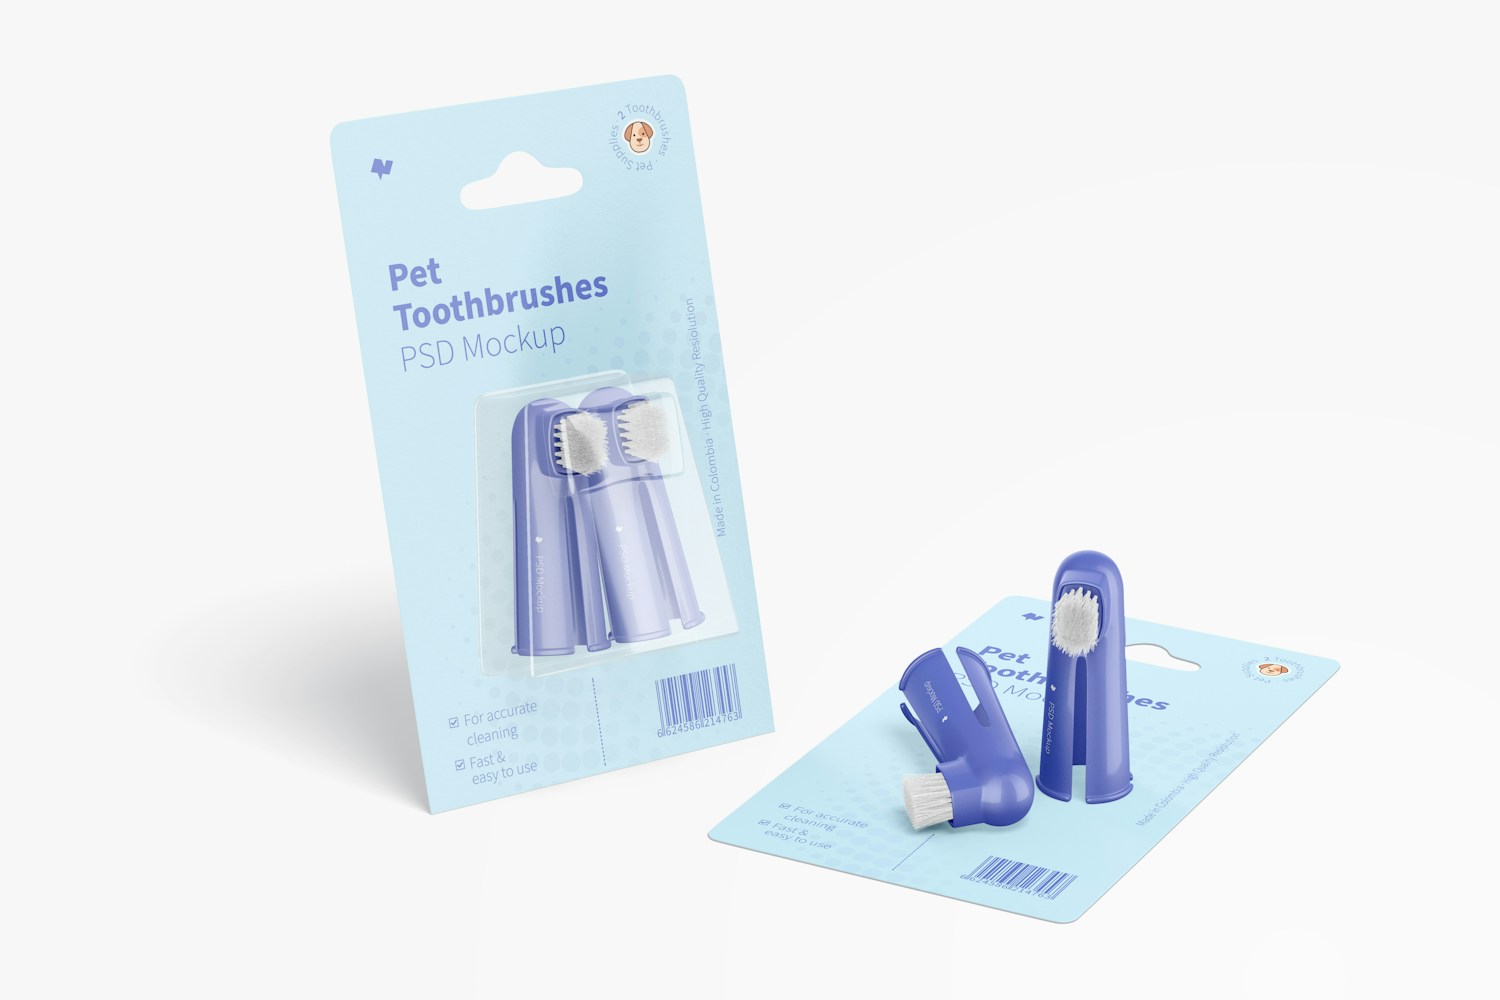 Pet Toothbrushes Mockup, Opened